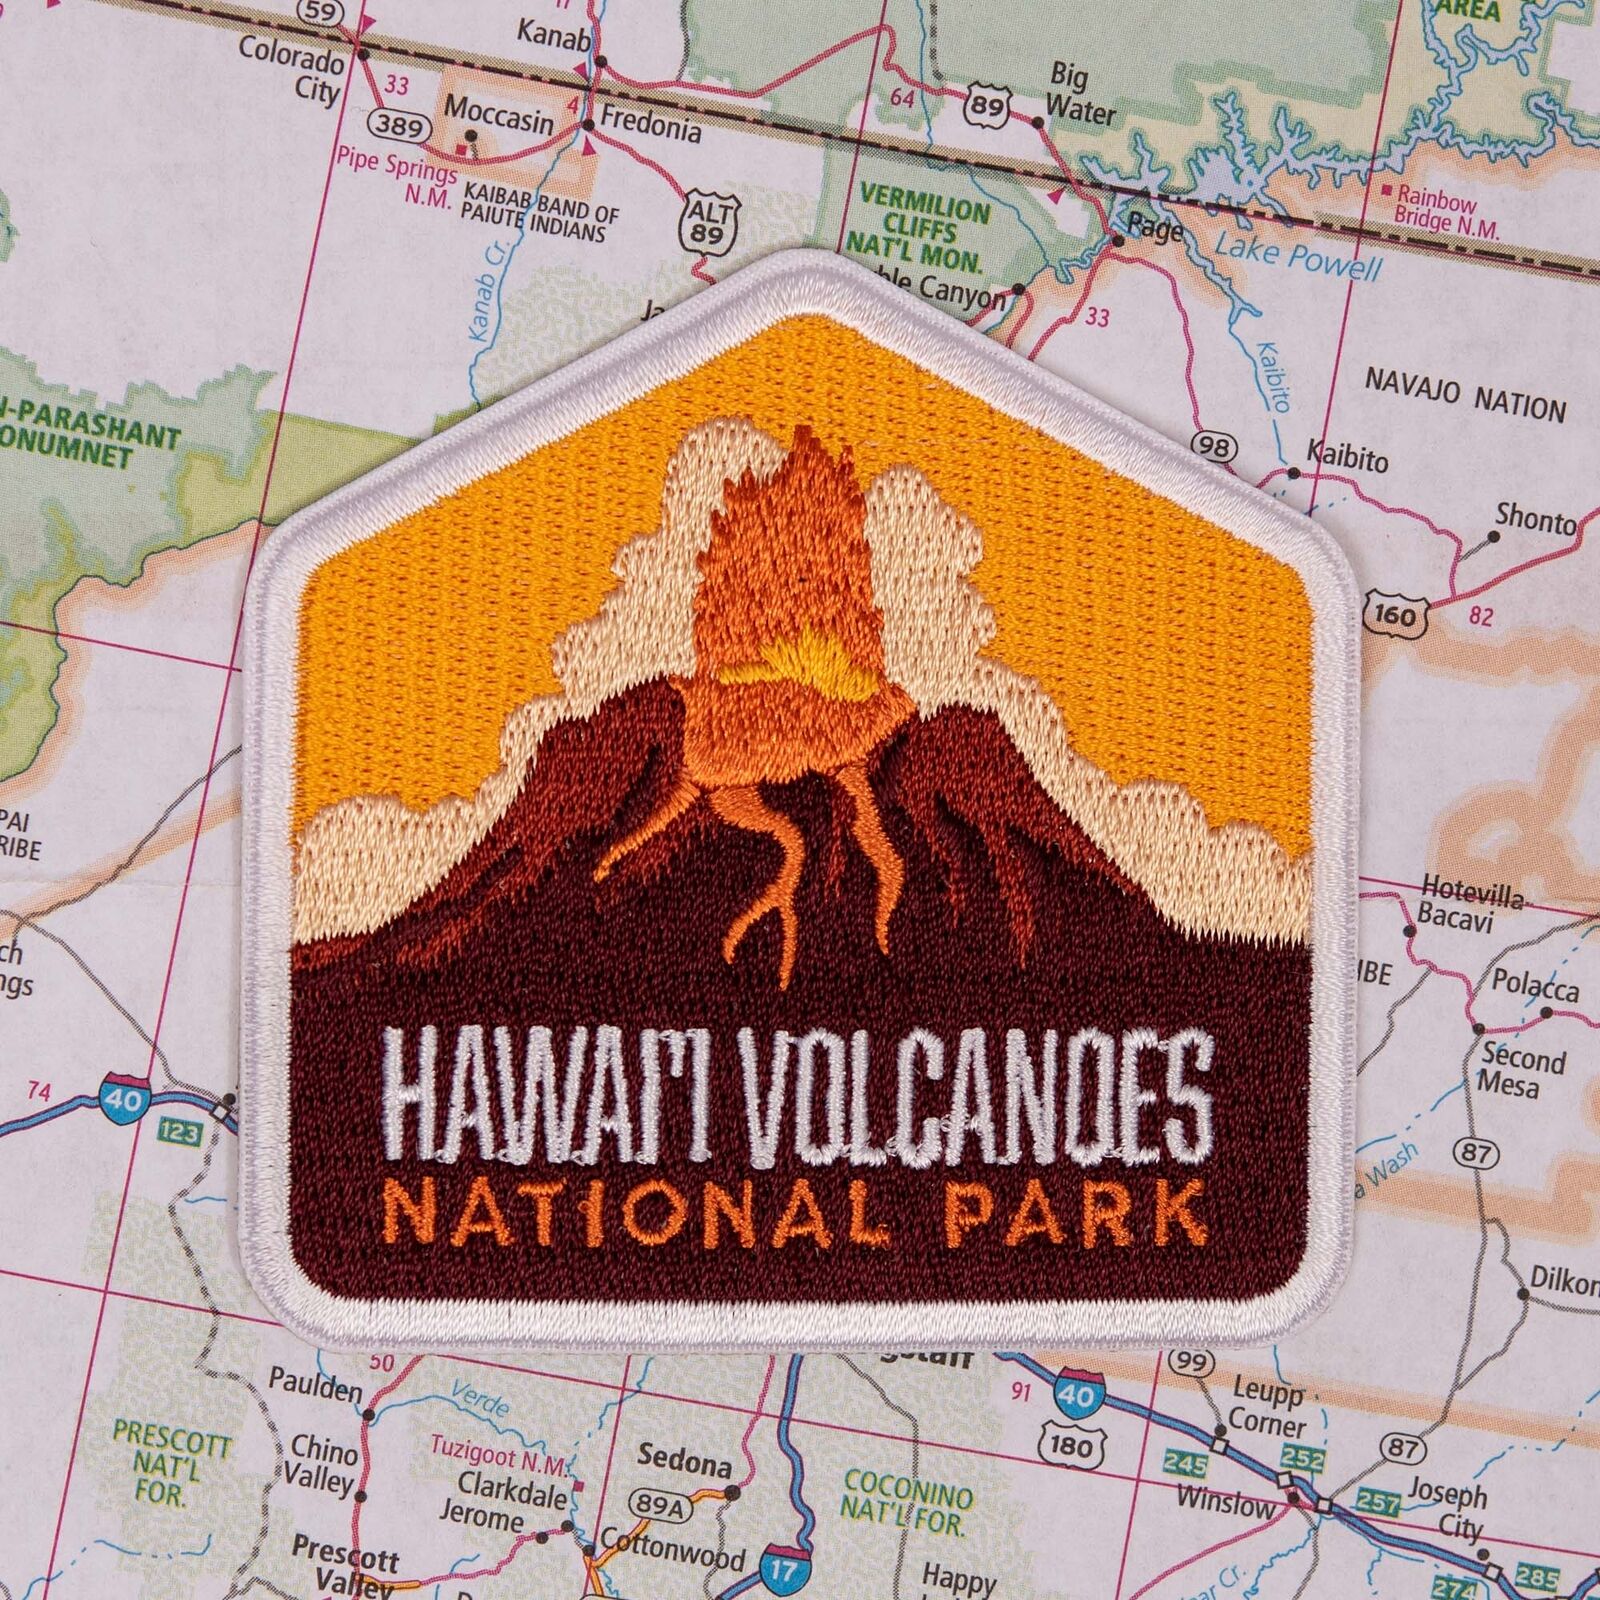 Hawaii Volcanoes Iron on Travel Patch - Great Souvenir or Gift for travellers